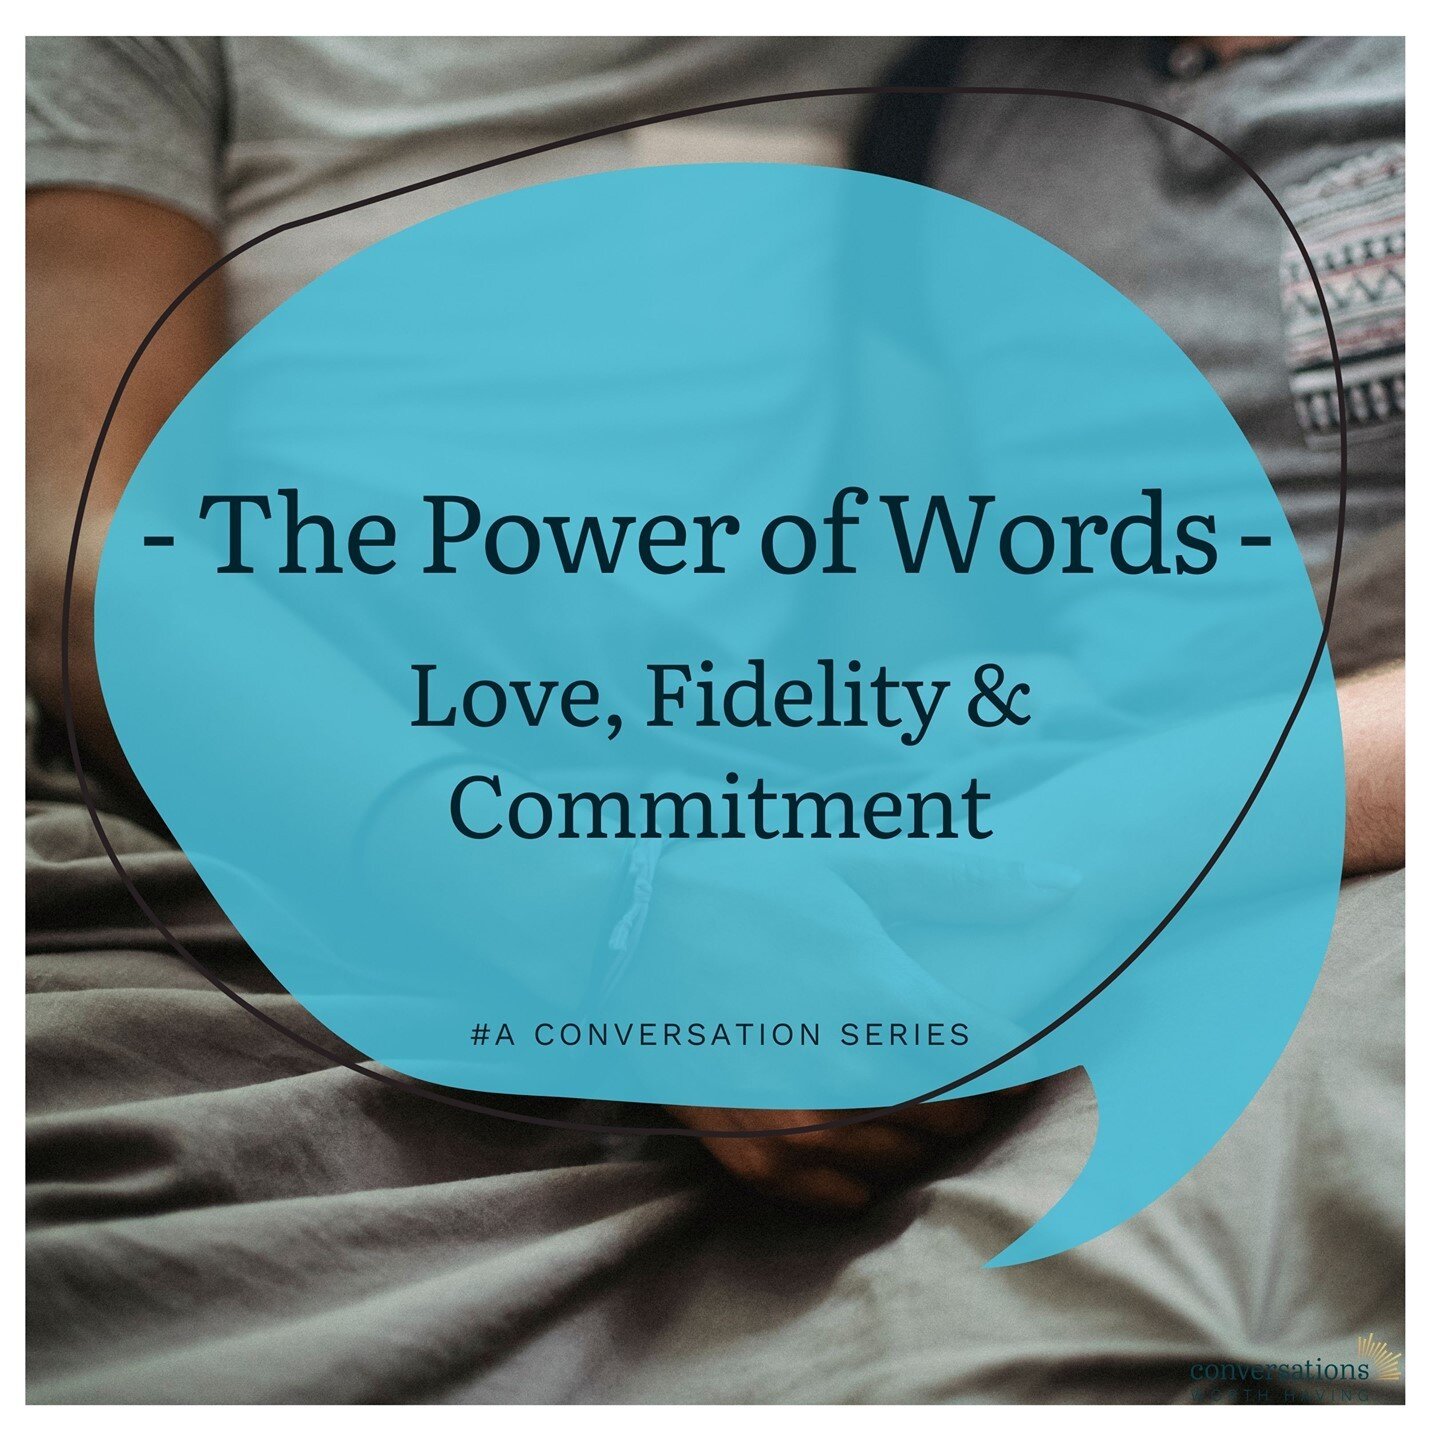 POWER OF WORDS AND LANGUAGE: Love, Fidelity and Commitment...⠀
⠀
⠀
⠀
⠀
⠀
⠀
⠀
#transformativeconversation #wellnesscommunity #wellbeingmentor #wellnessmentor #creatingchange #feelingempowered #wholeheartedliving #thepowerofwords #thepoweroflanguage #l